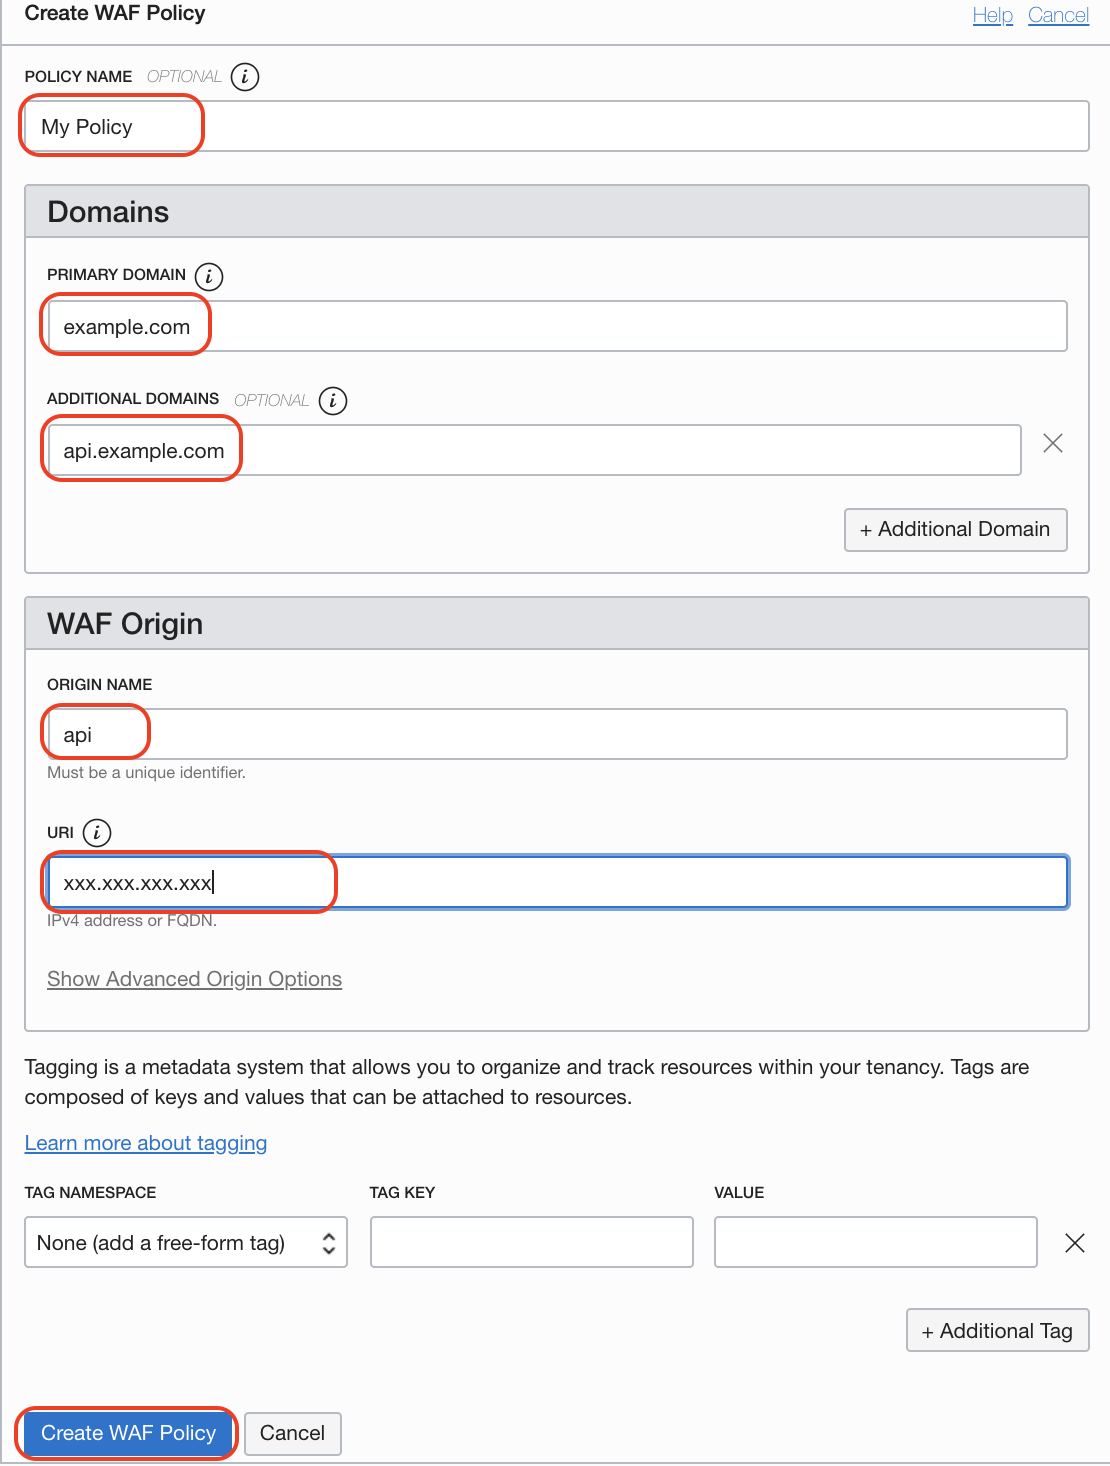 Create WAF Policy Details